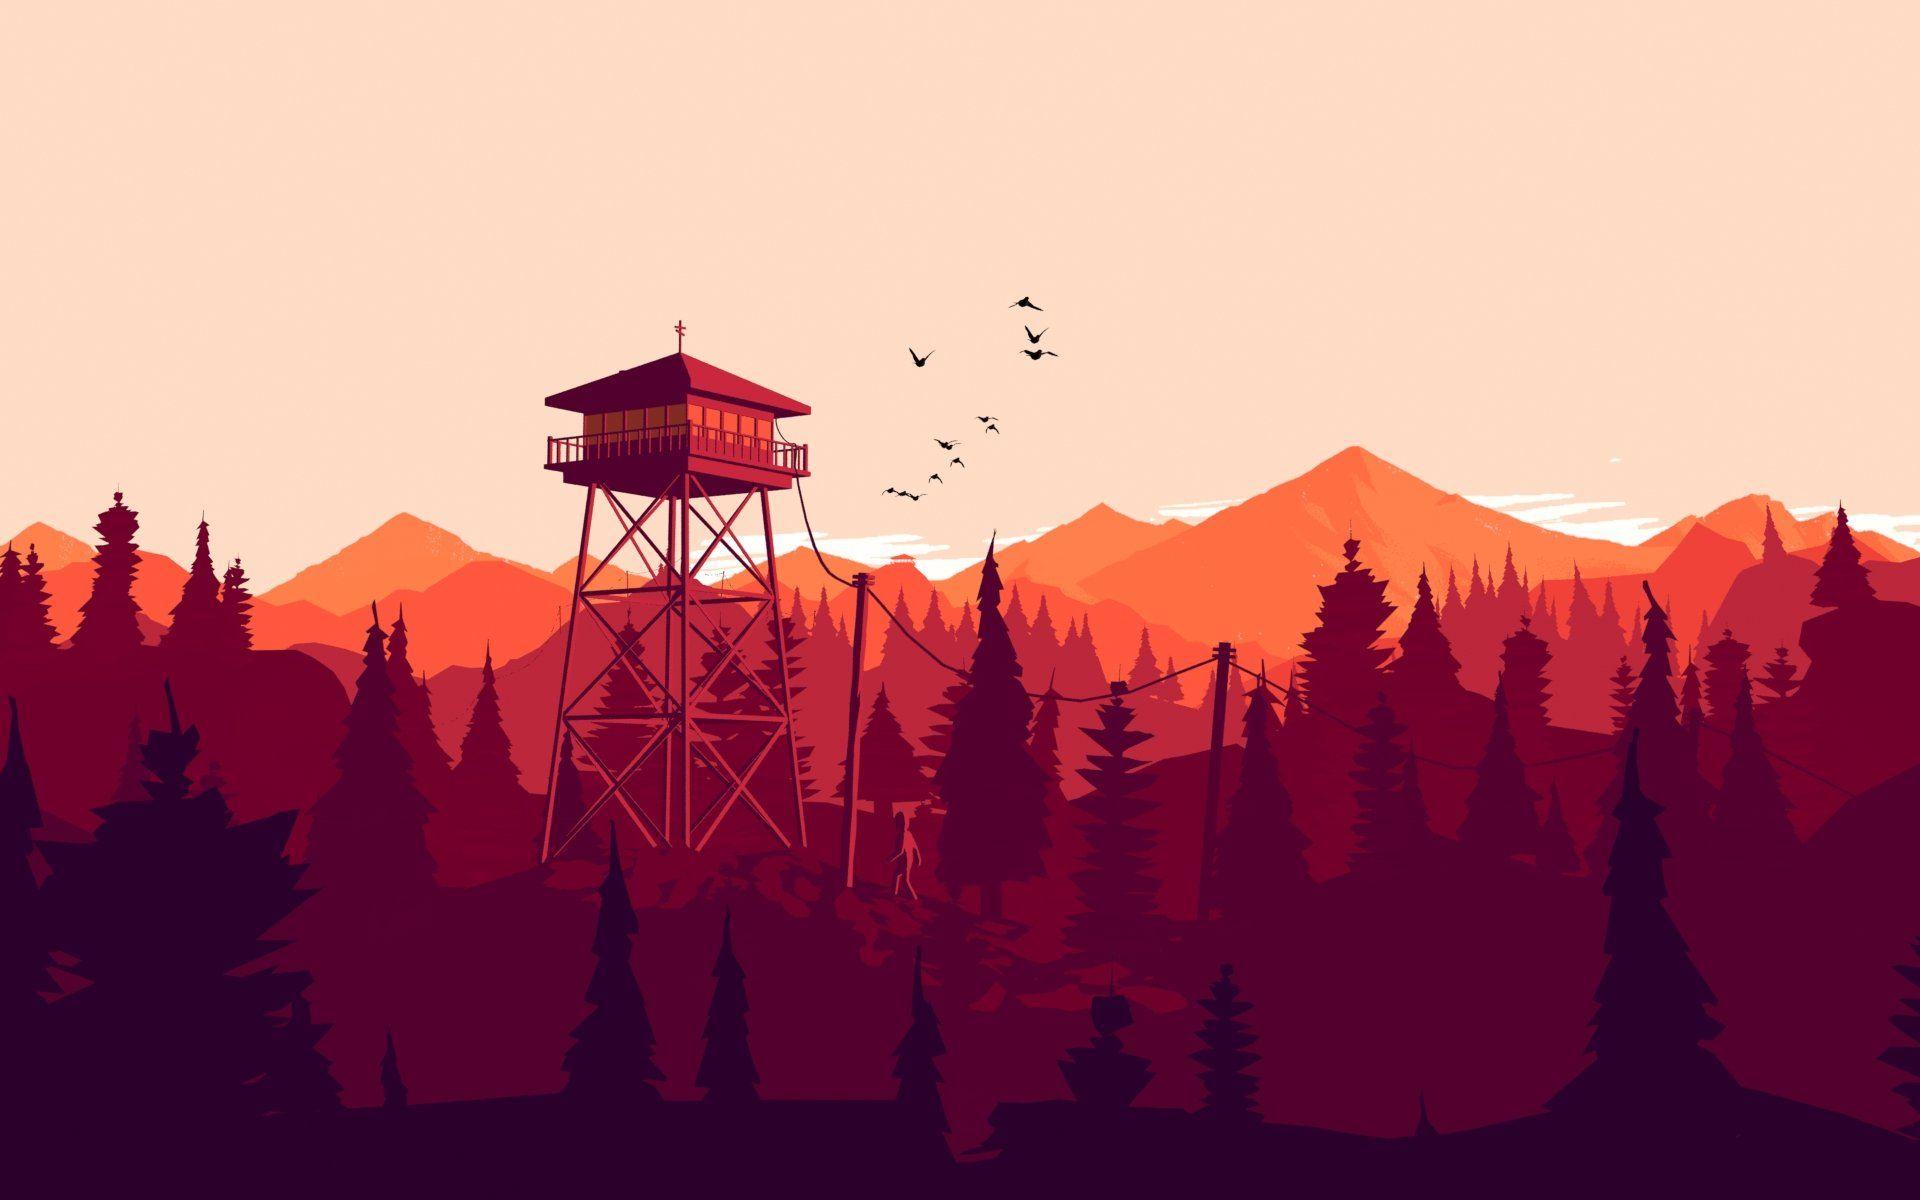 No plans for Firewatch on Switch at the moment, says Campo Santo